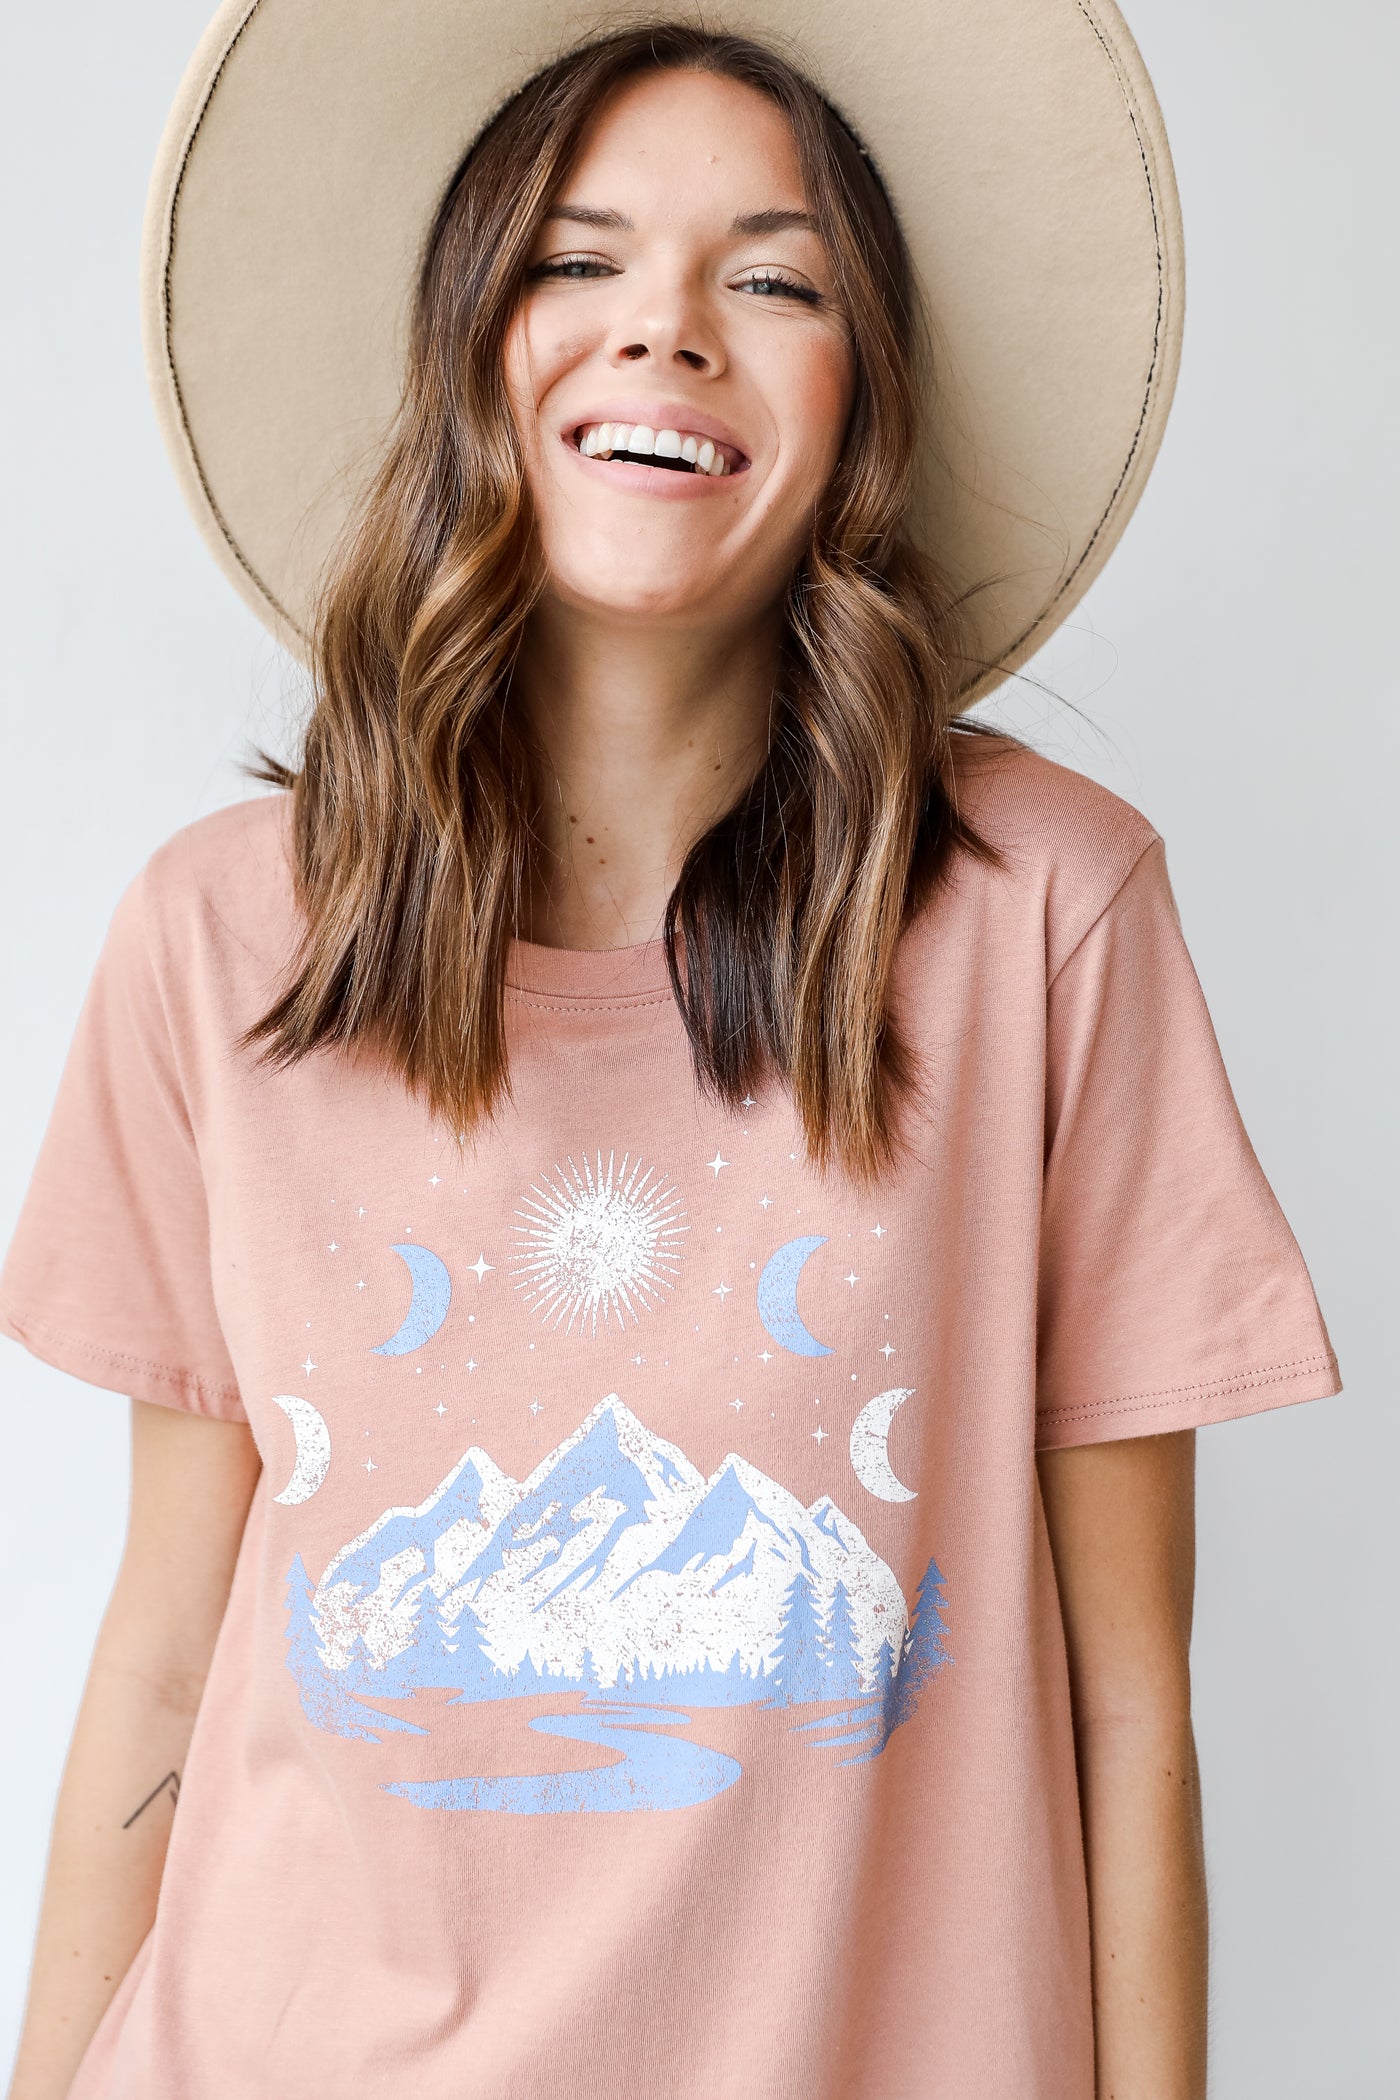 Mountain Scene Graphic Tee from dress up